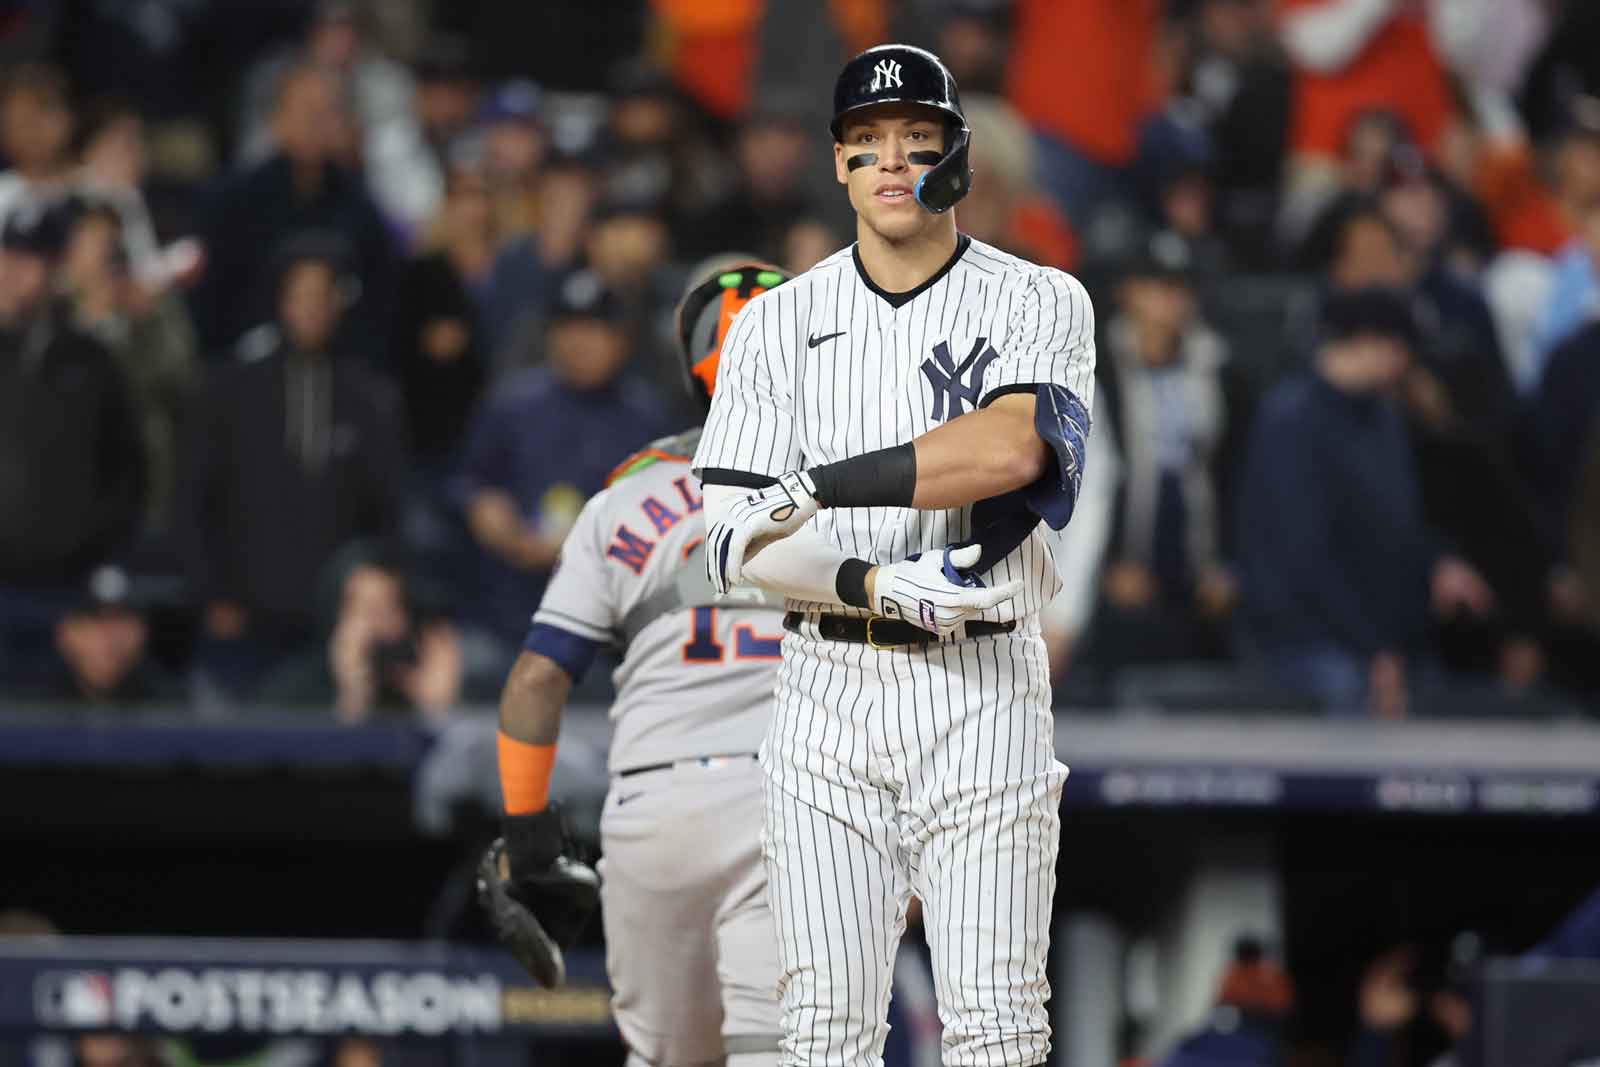 Twitter Explodes at News of Aaron Judge Re-Signing With Yankees